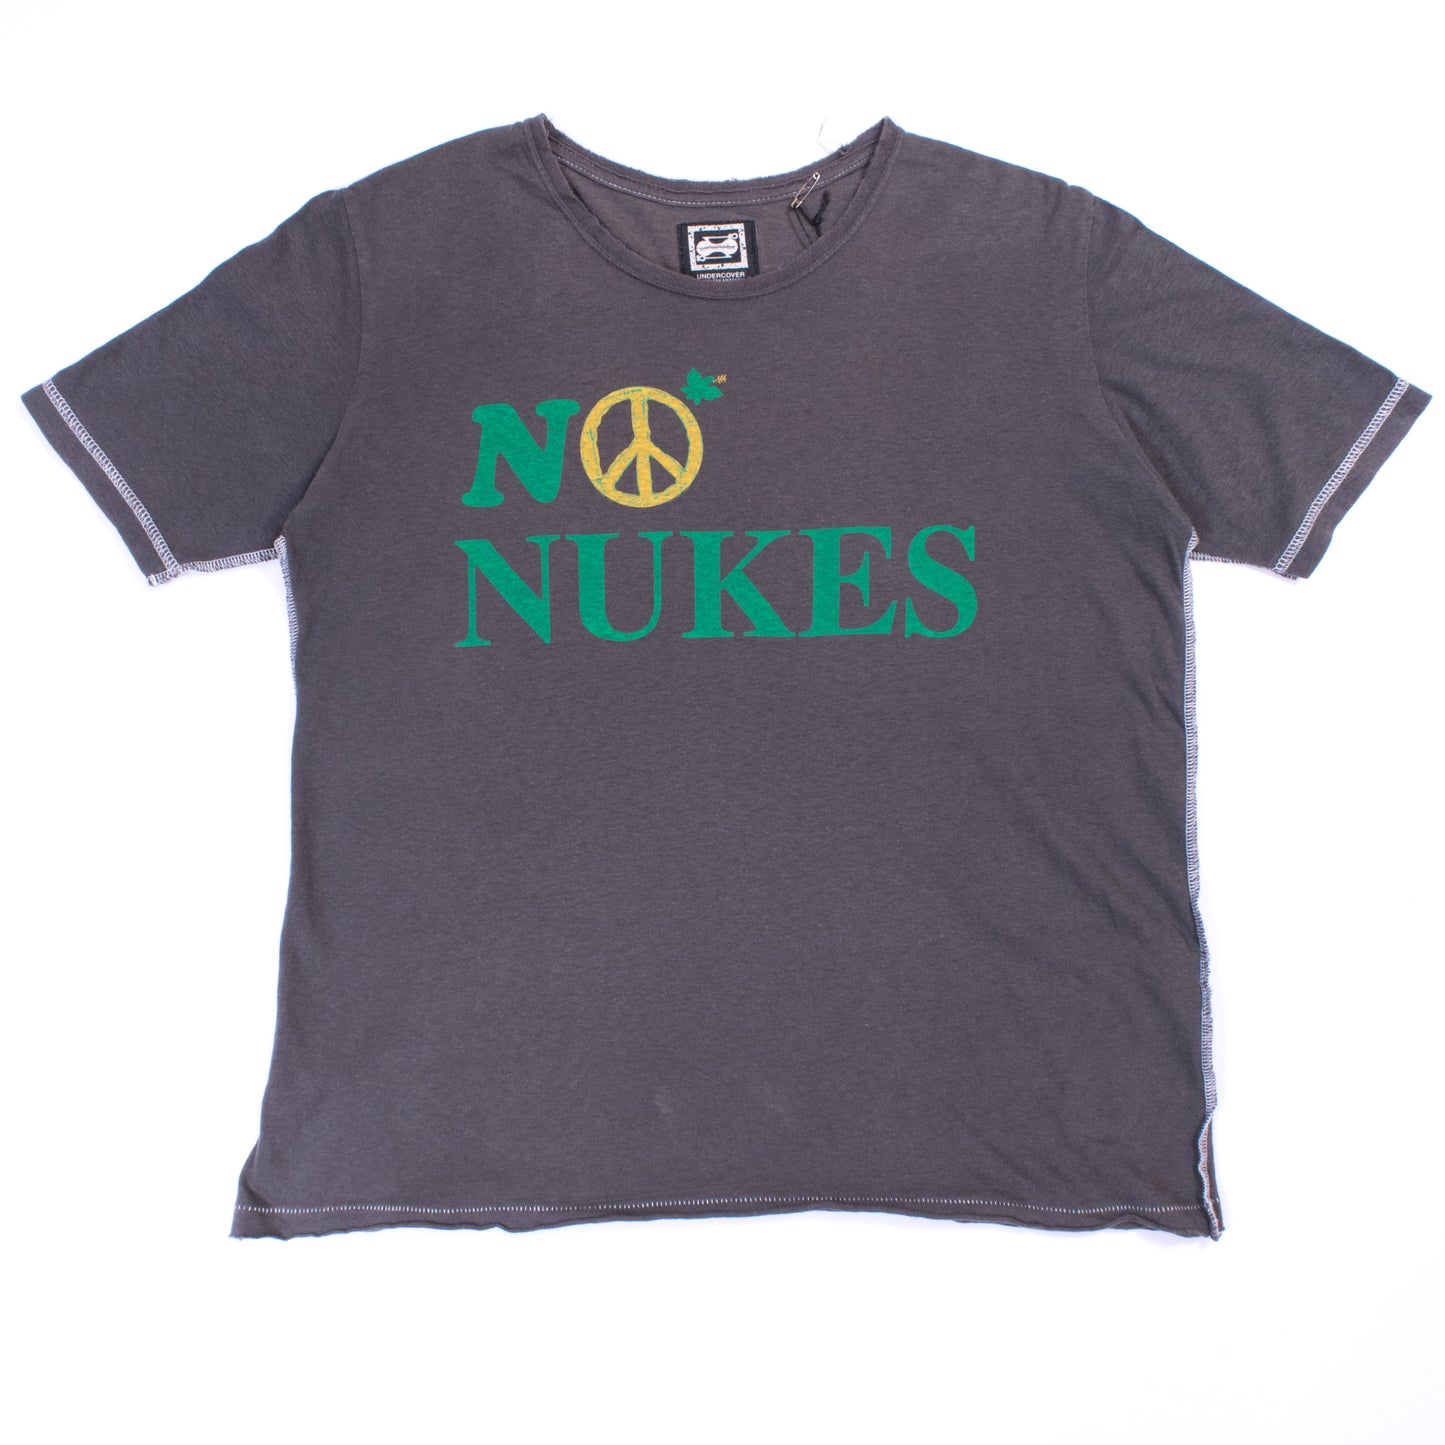 Undercover "No Nukes" Scab T-Shirt (2003SS)